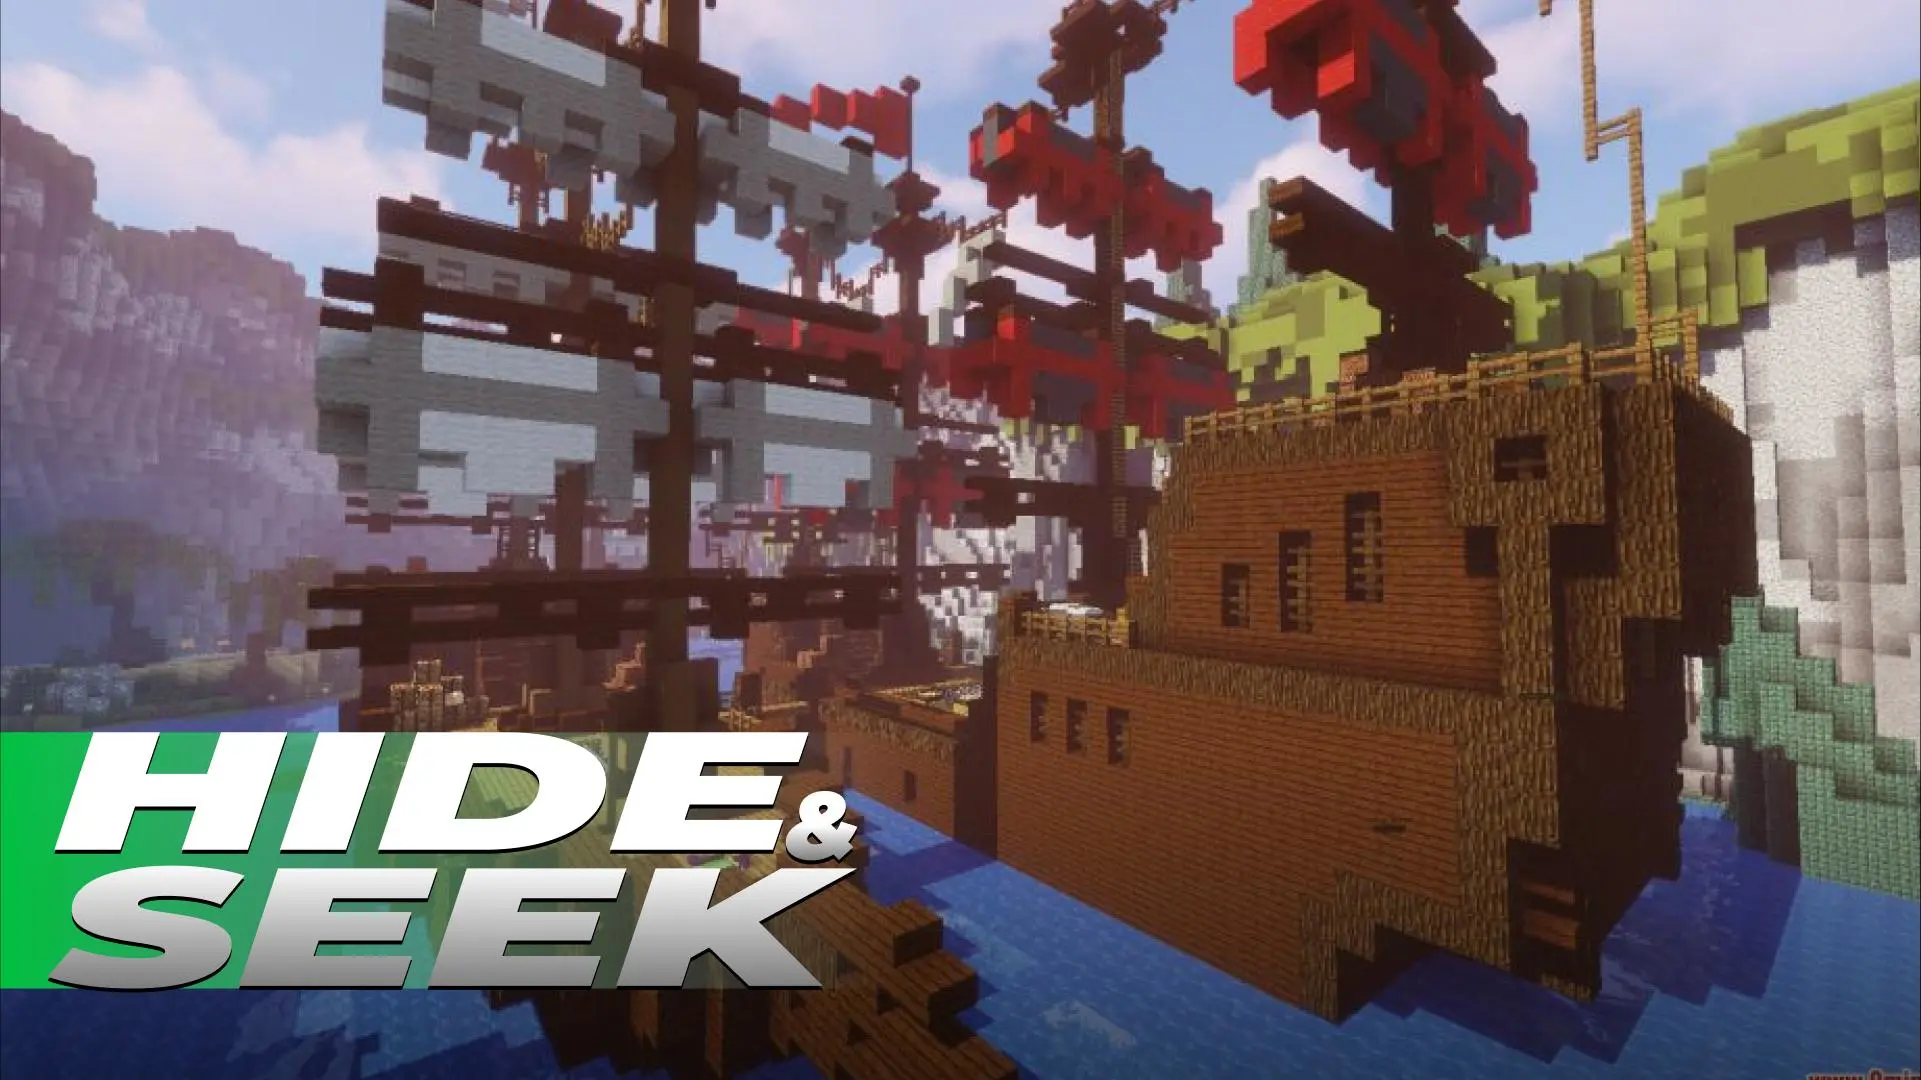 Download Hide and seek for minecraft android on PC